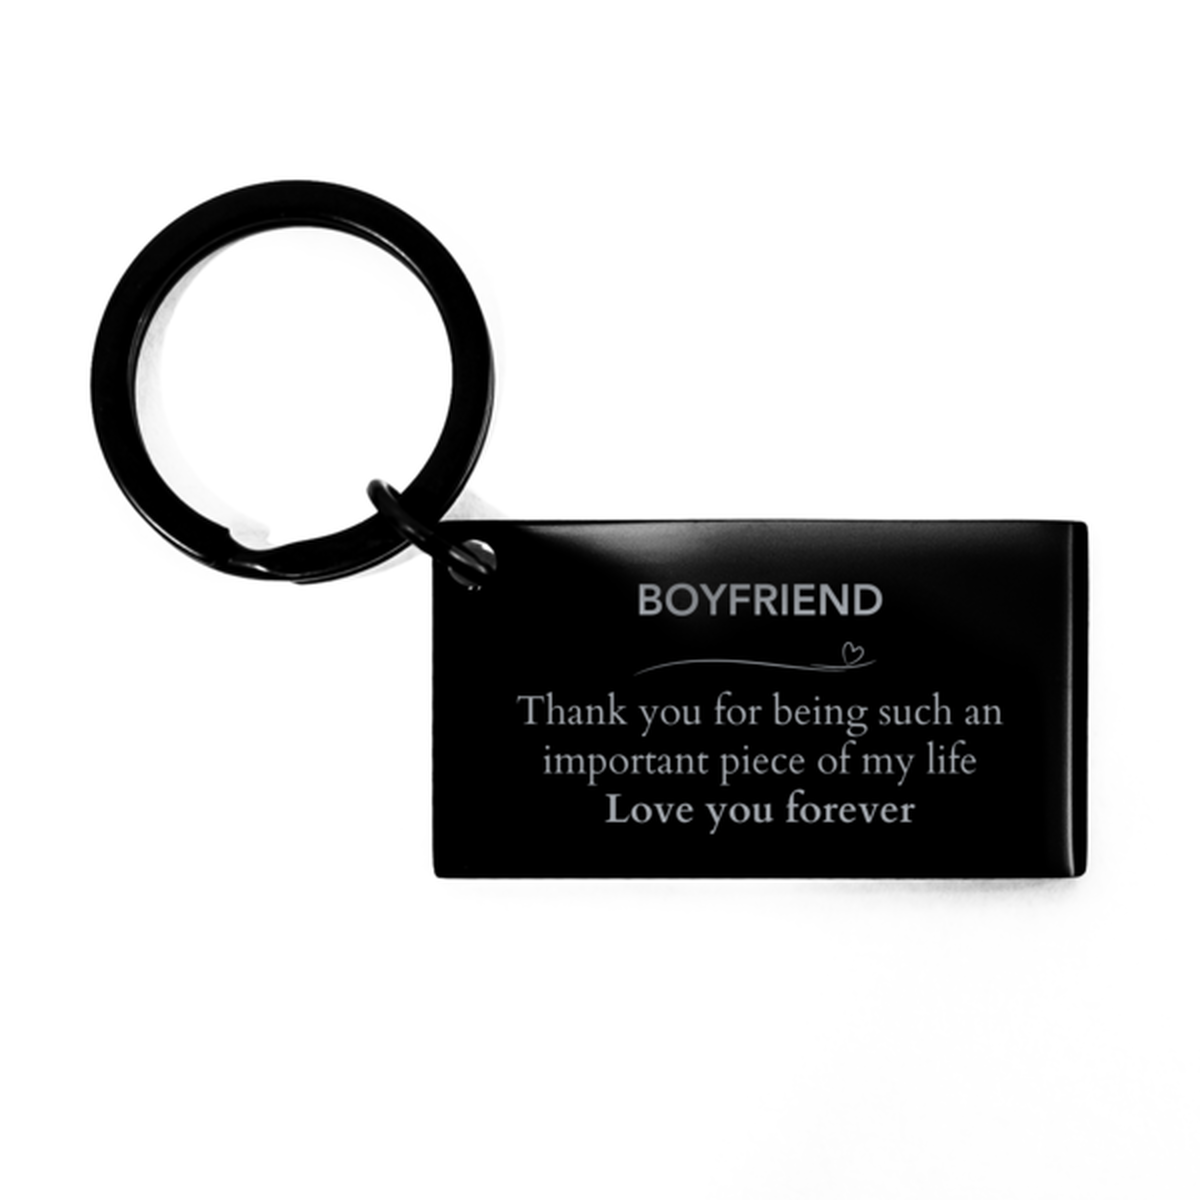 Appropriate Boyfriend Keychain Epic Birthday Gifts for Boyfriend Thank you for being such an important piece of my life Boyfriend Christmas Mothers Fathers Day